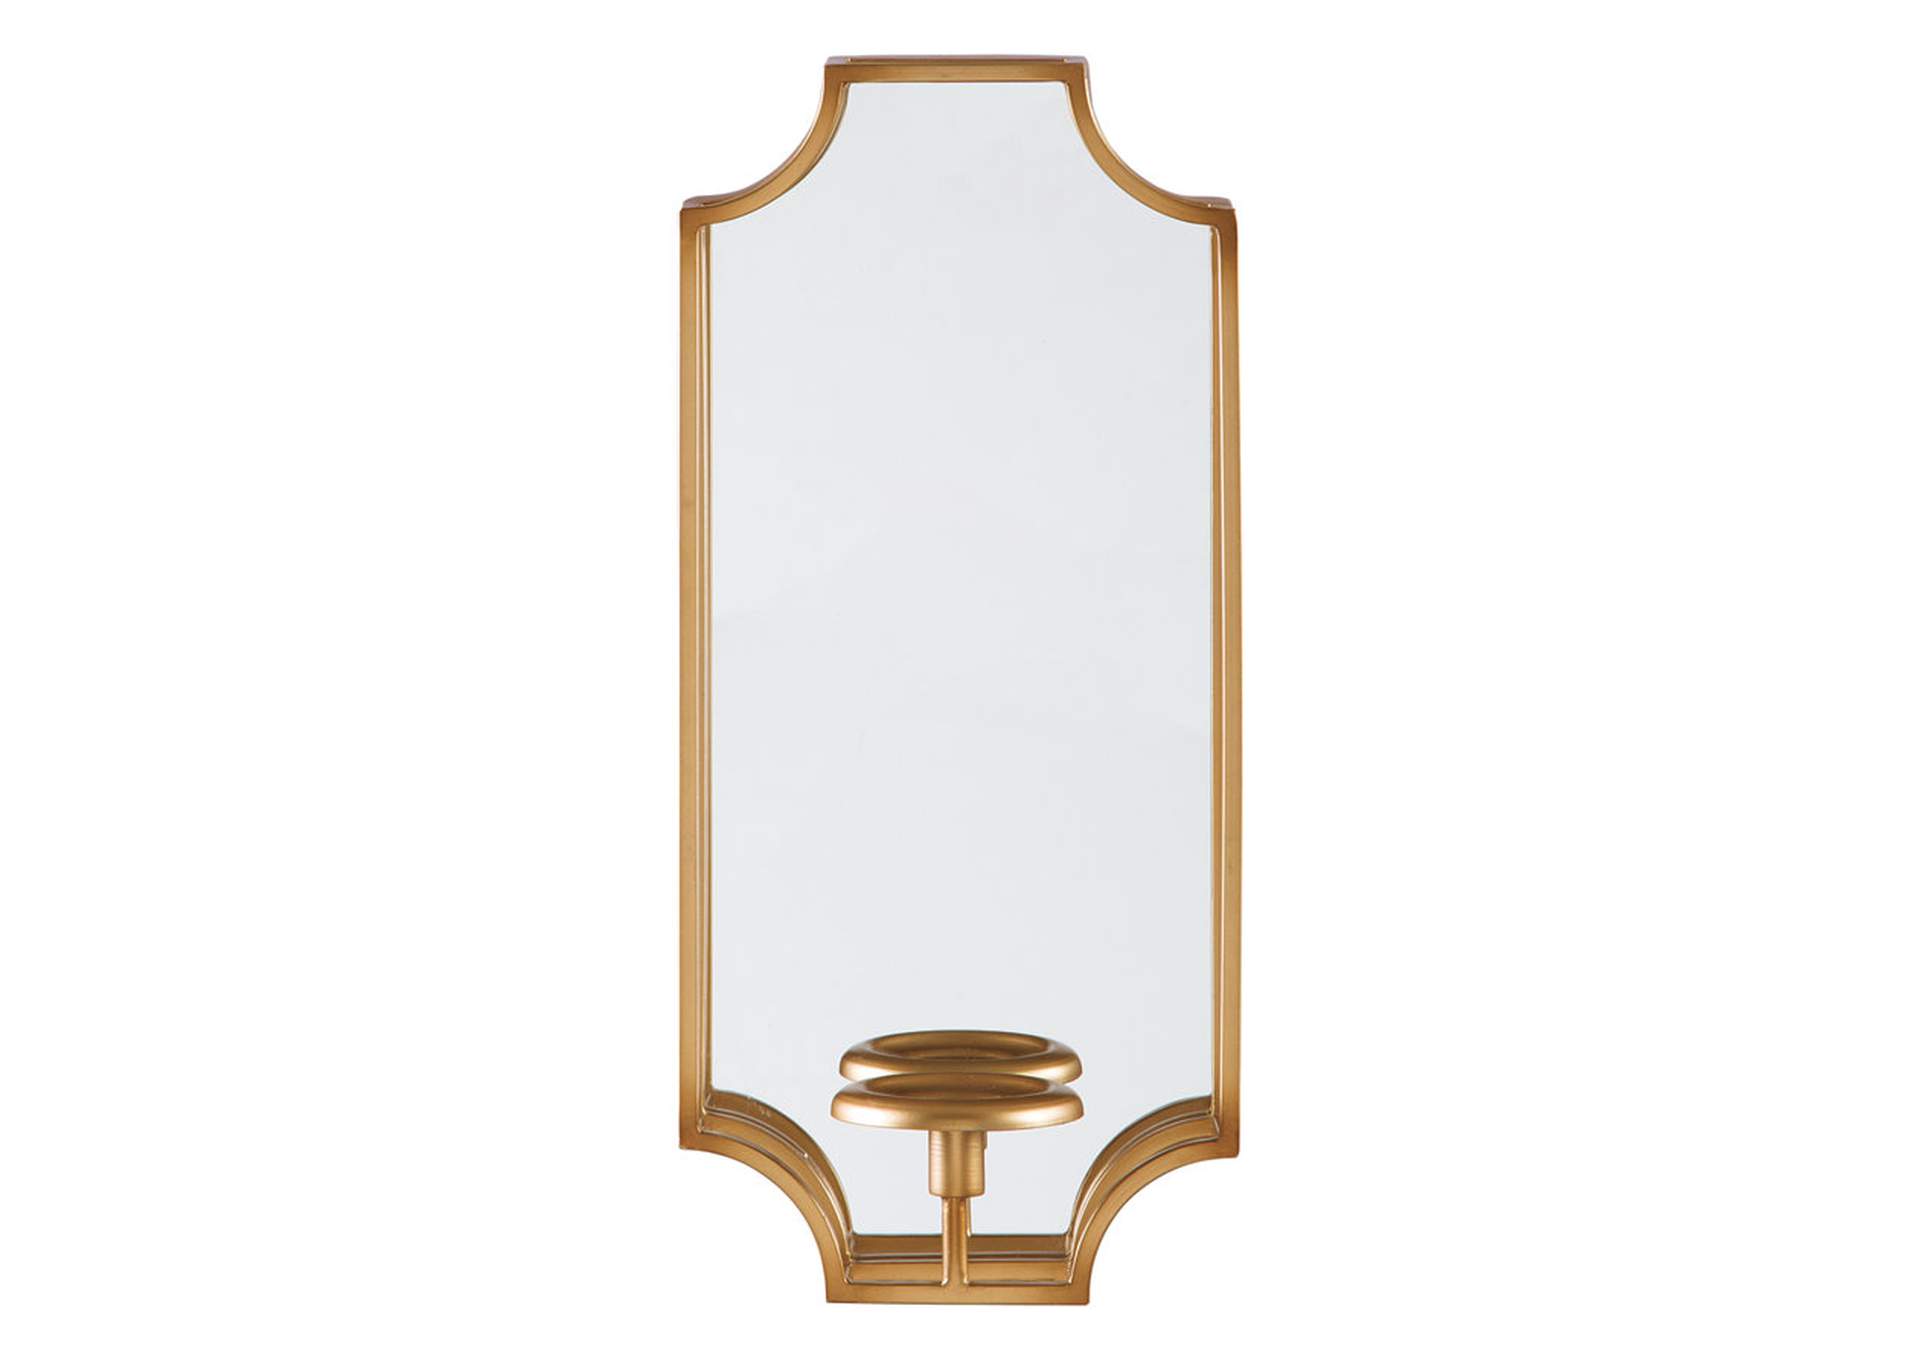 Dumi Wall Sconce,Direct To Consumer Express